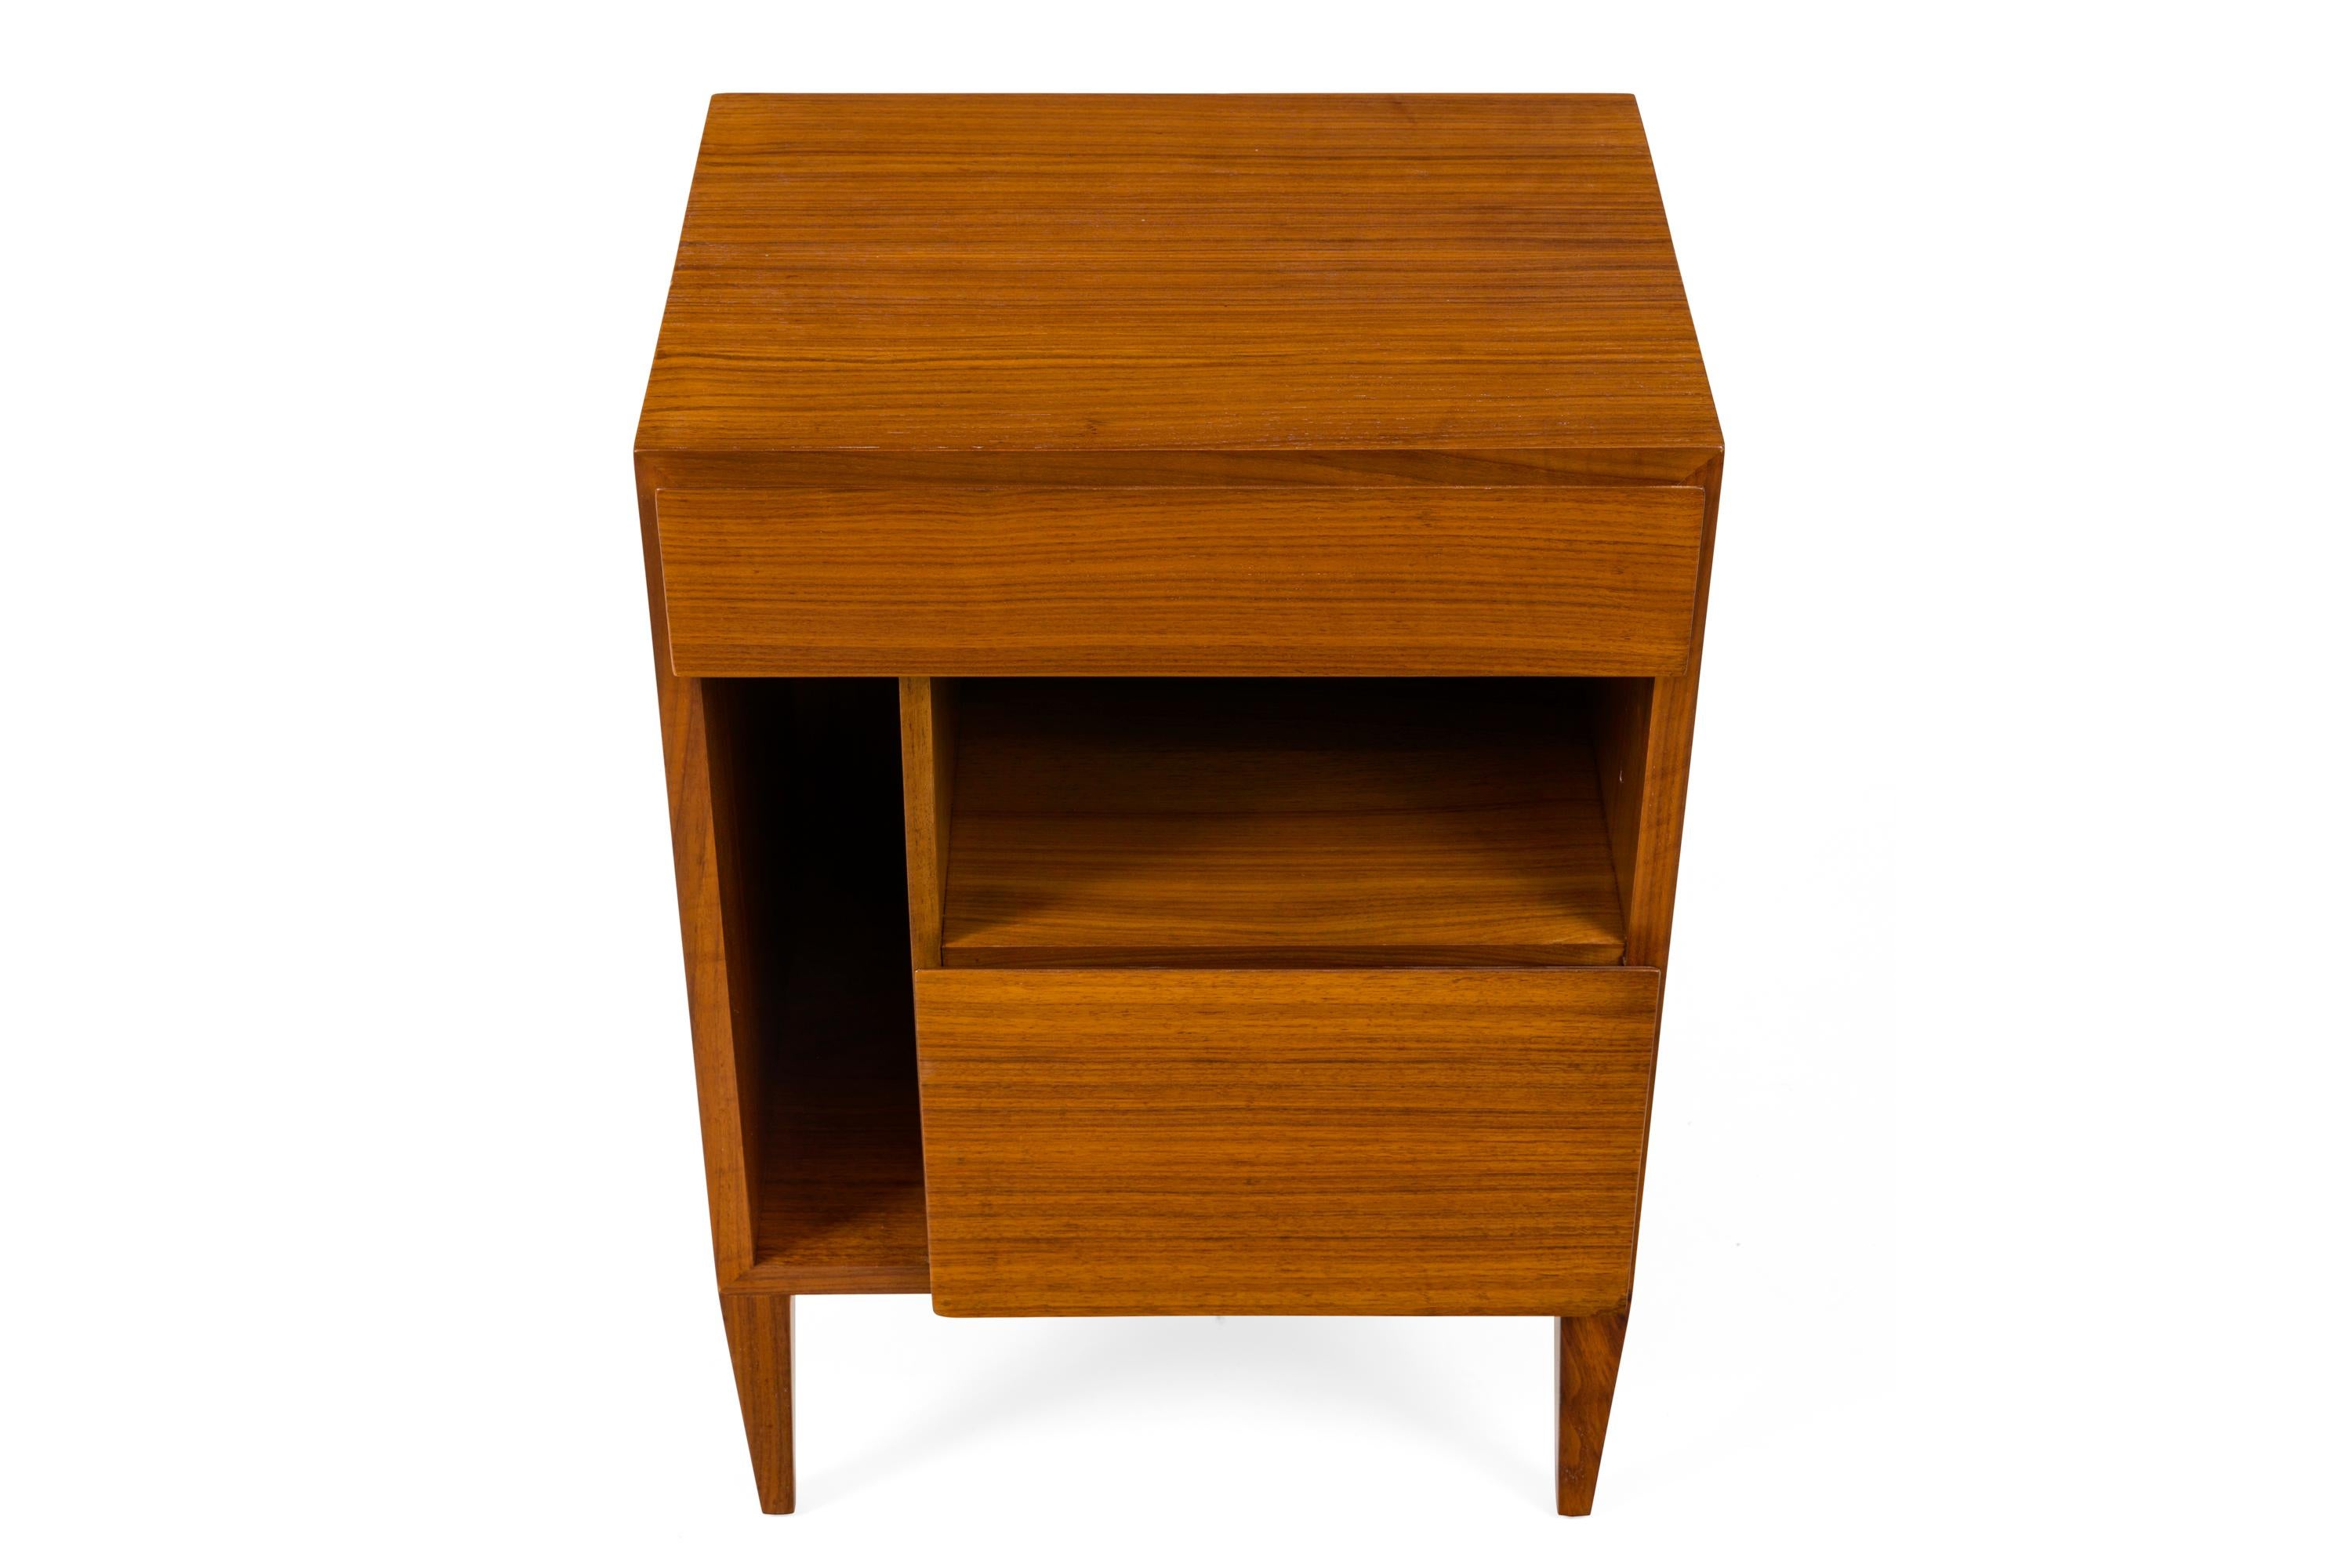 Mid-20th Century Gio Ponti Nightstands for Singer & Sons, Italy, 1955